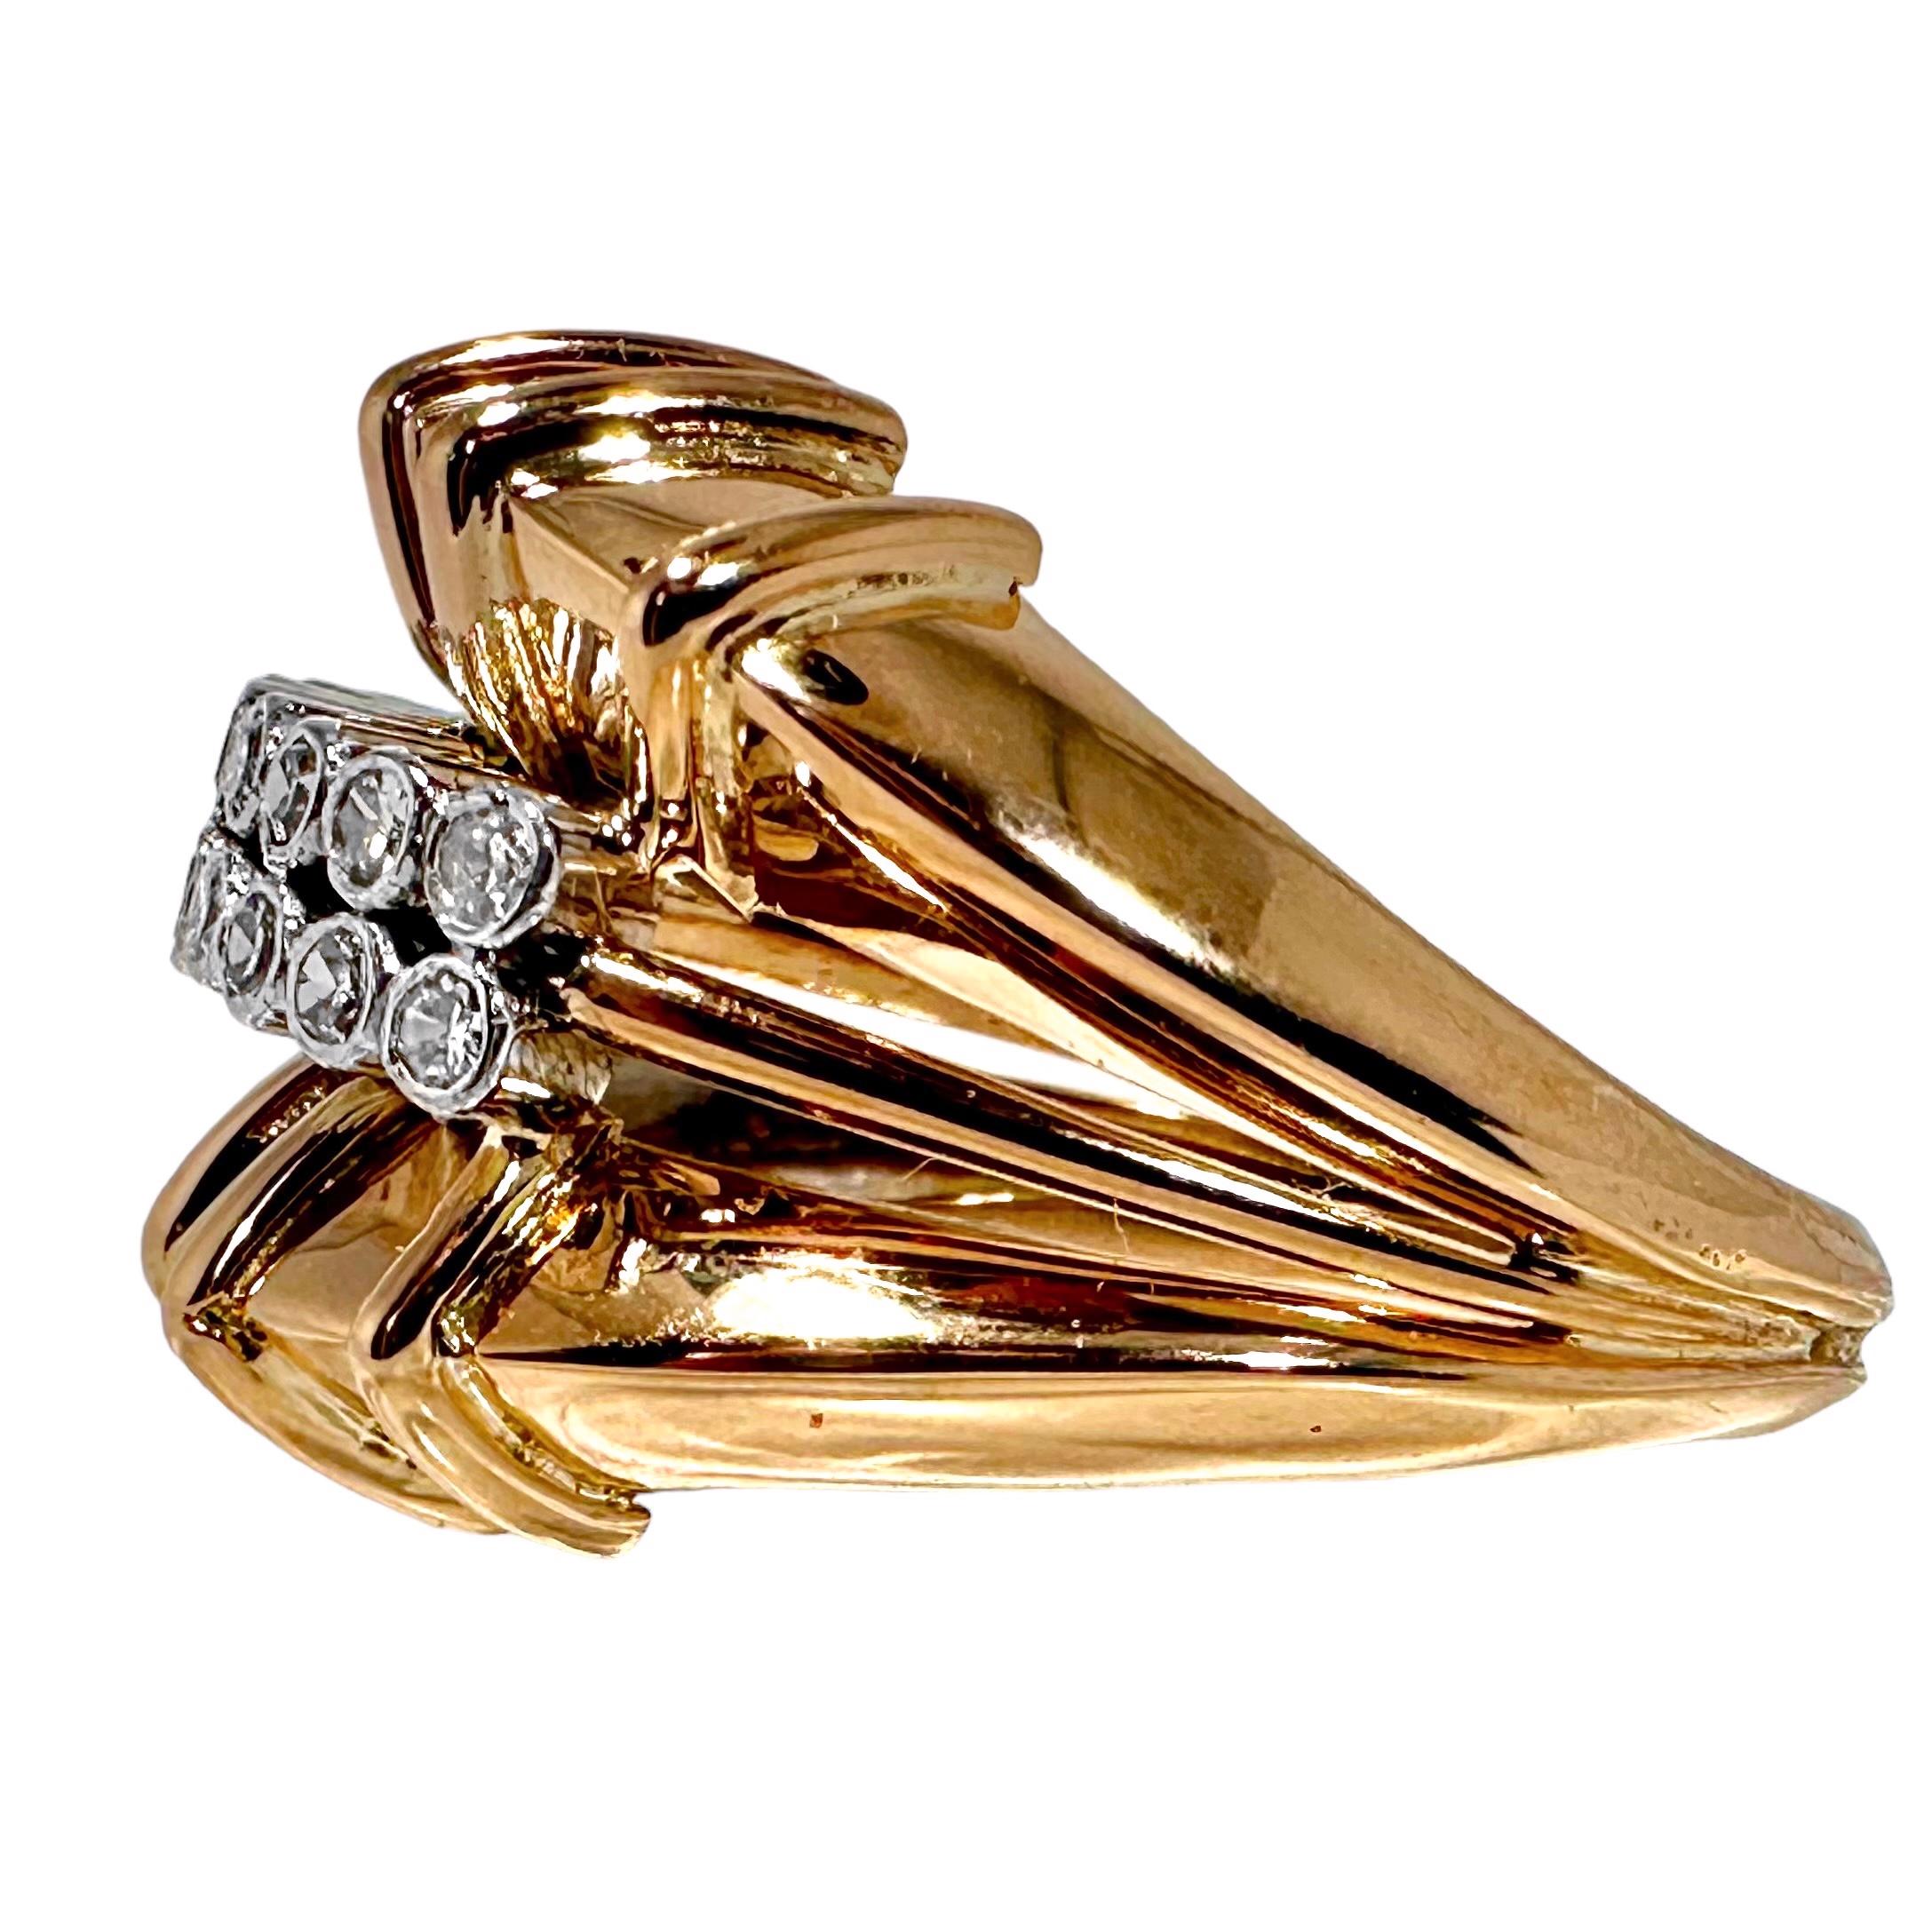 Extremely High Style 14K Rose Gold, Platinum and Diamond Retro Ring For Sale 3